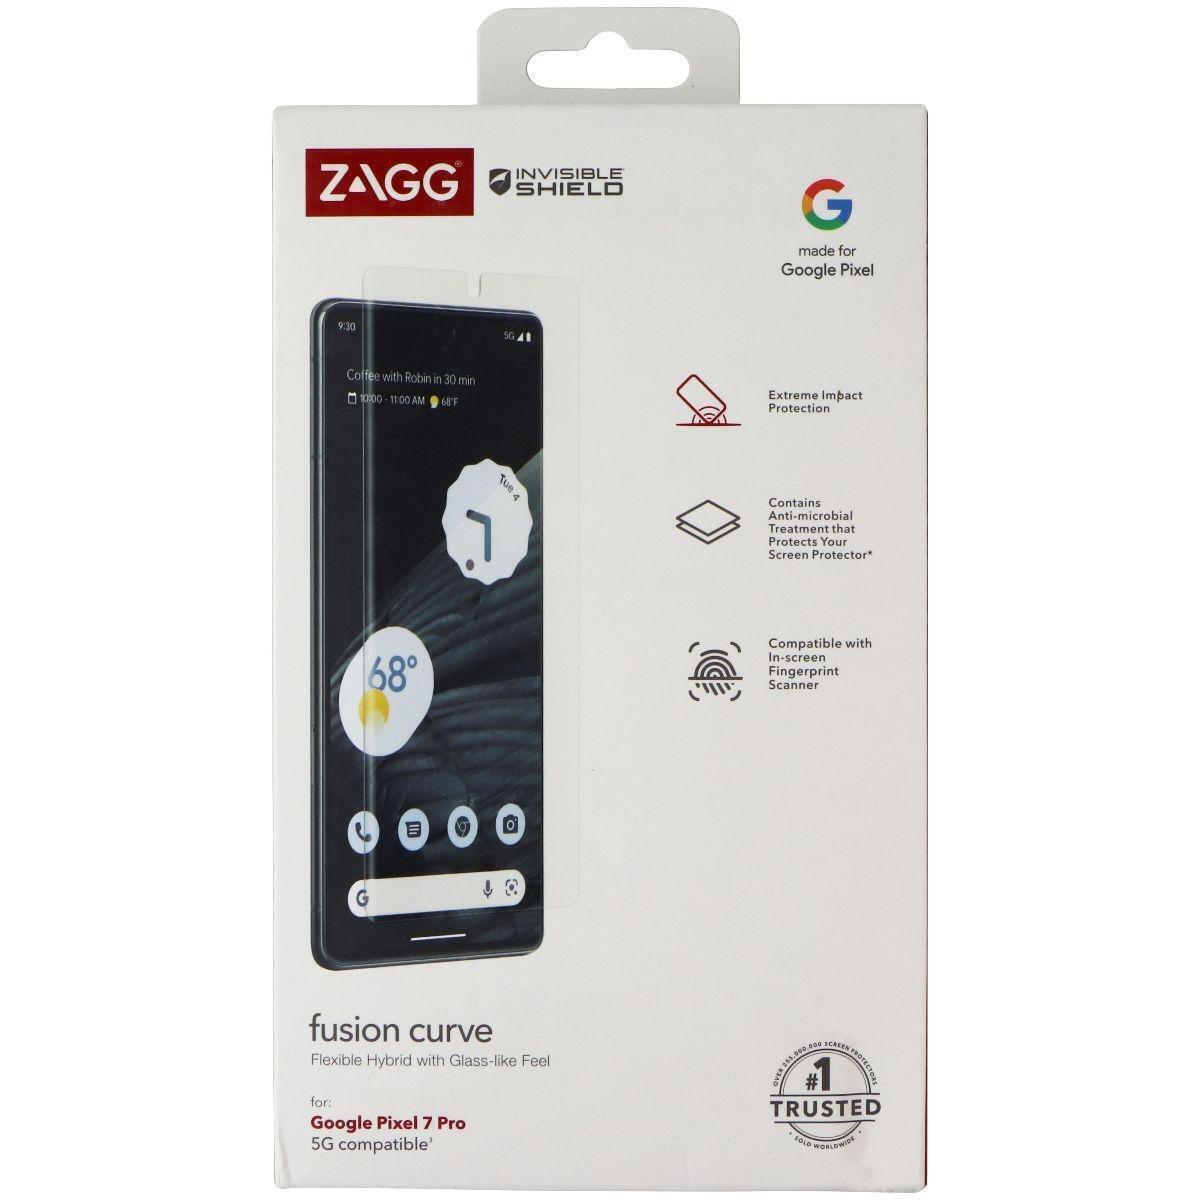 ZAGG InvisibleShield (Fusion Curve) Series Case for Google Pixel 7 Pro - Clear